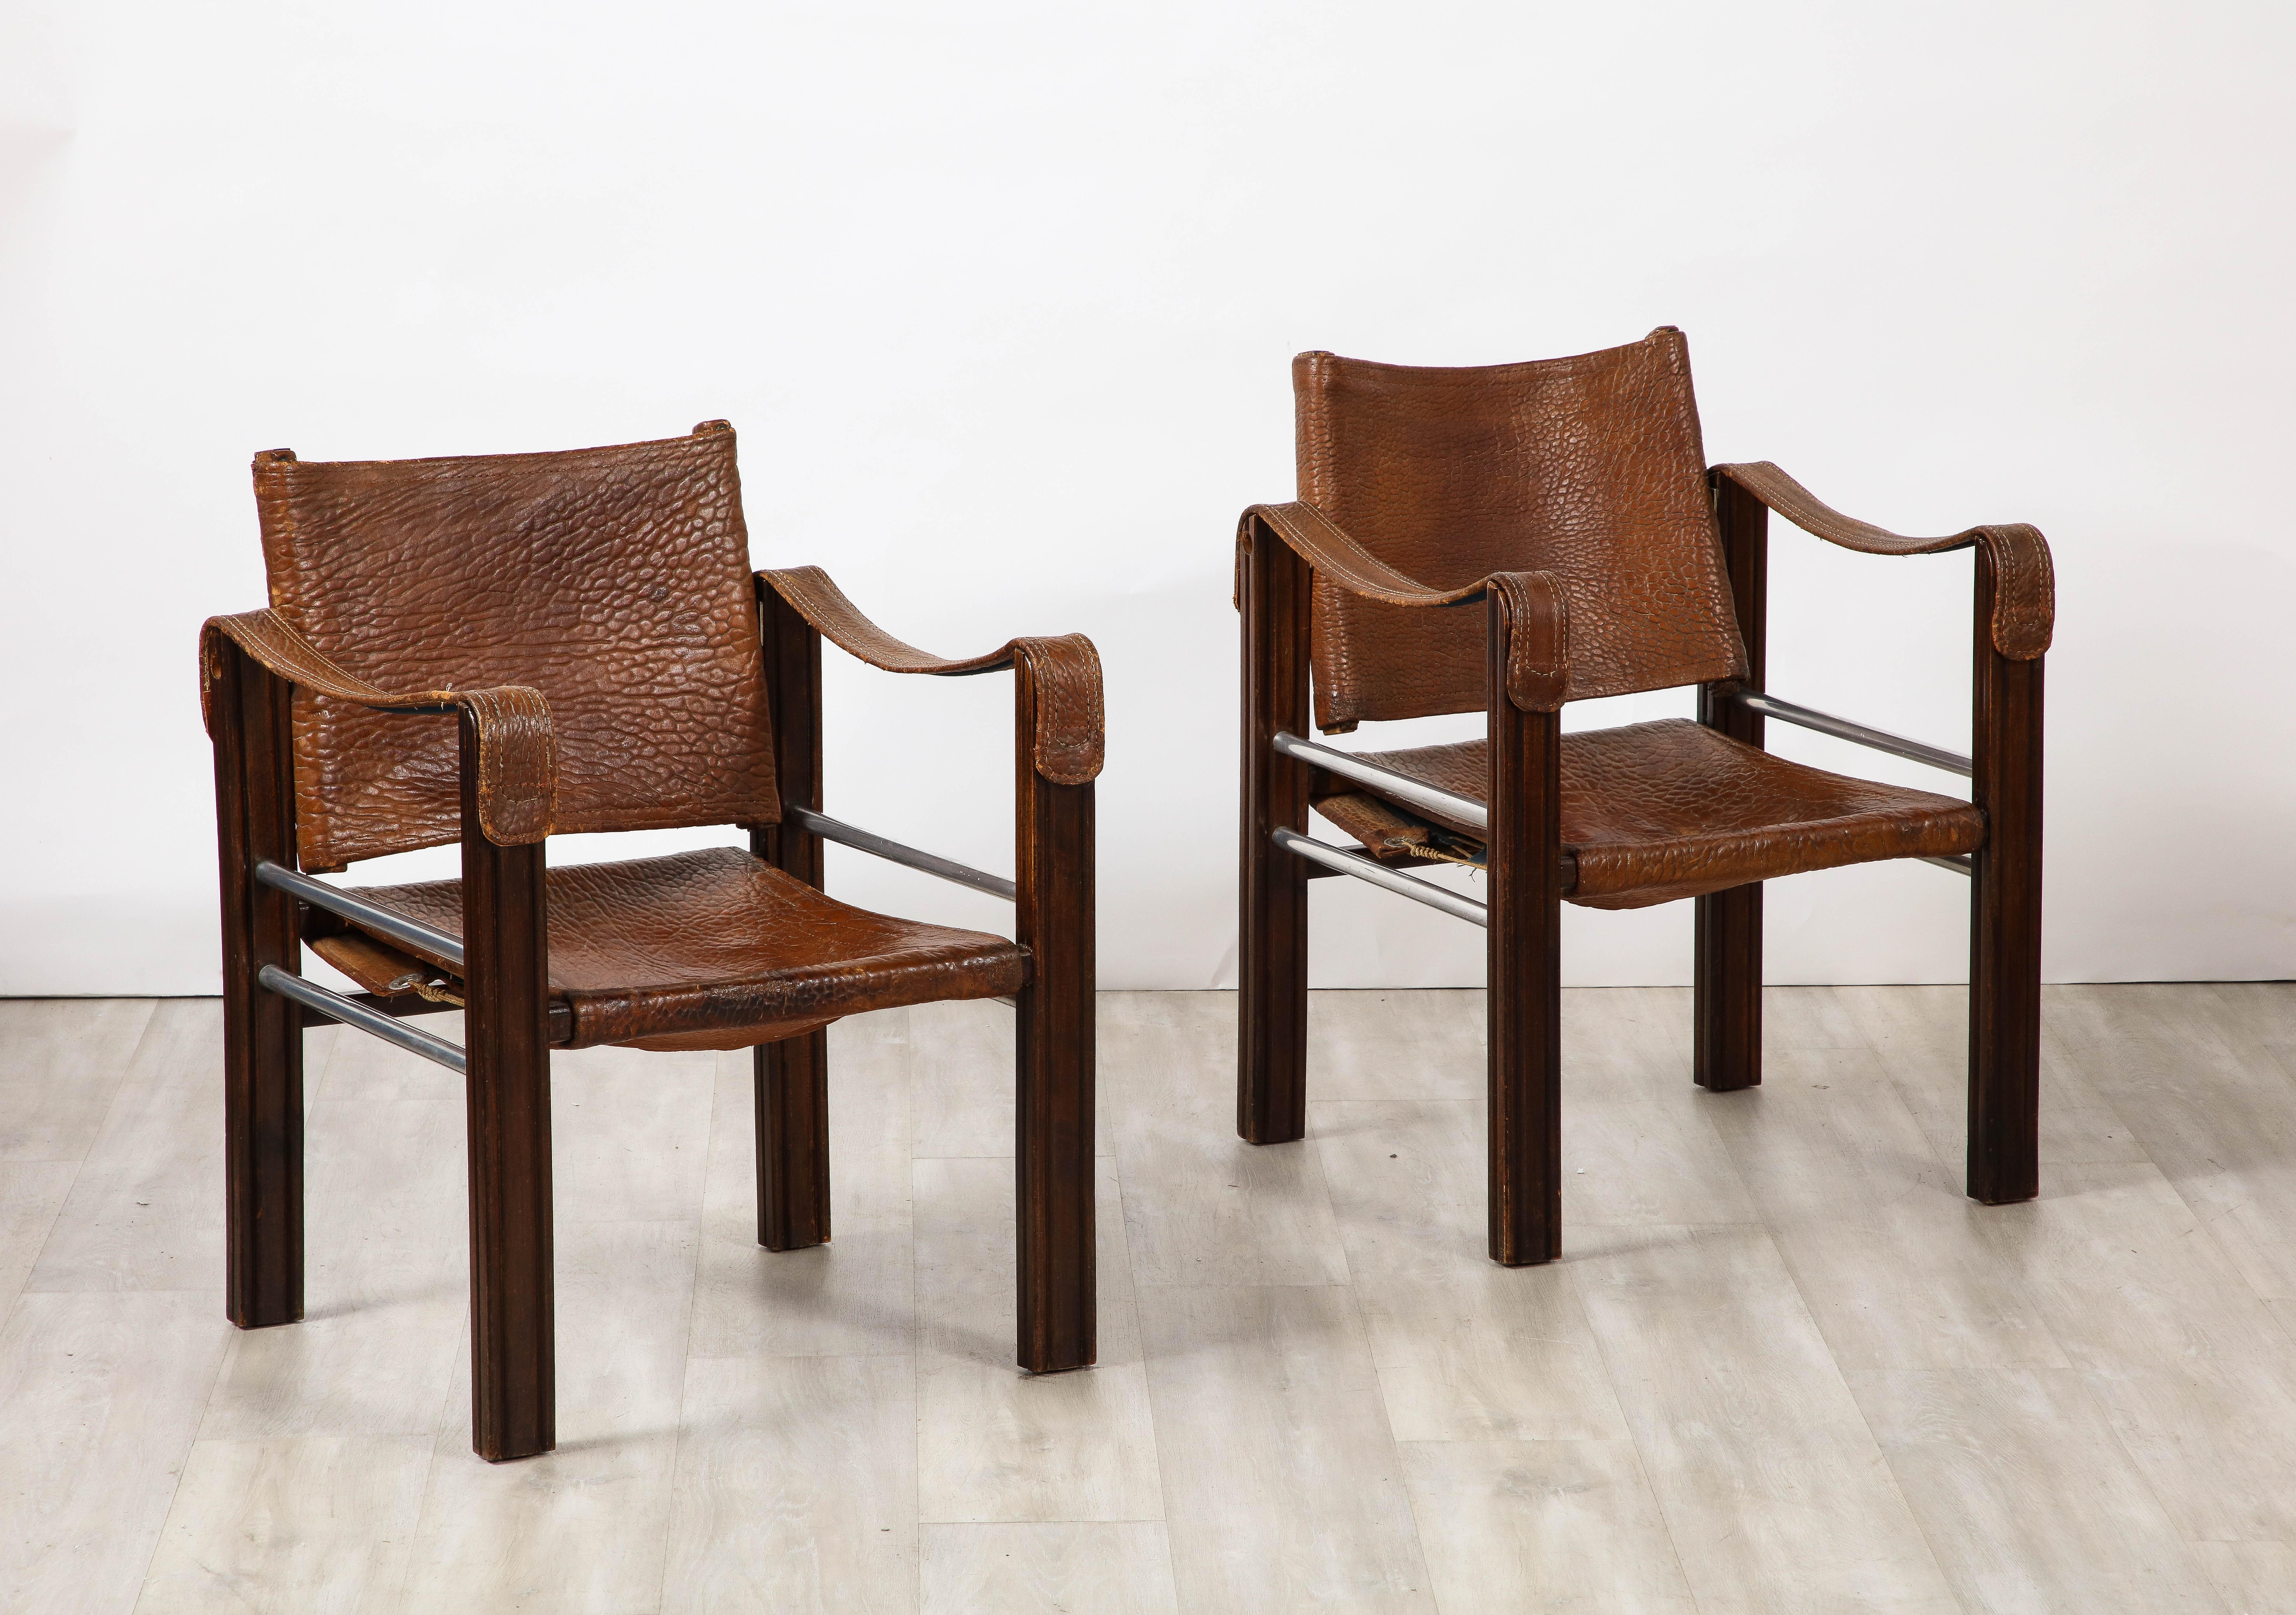 An early and unique pair of Spanish 1920's safari arm chairs in a wonderful patinated pebbled chocolate brown leather with chrome horizontal supports on the sides.  The legs are straight and are a rich carved walnut.  A beautiful contrast of the